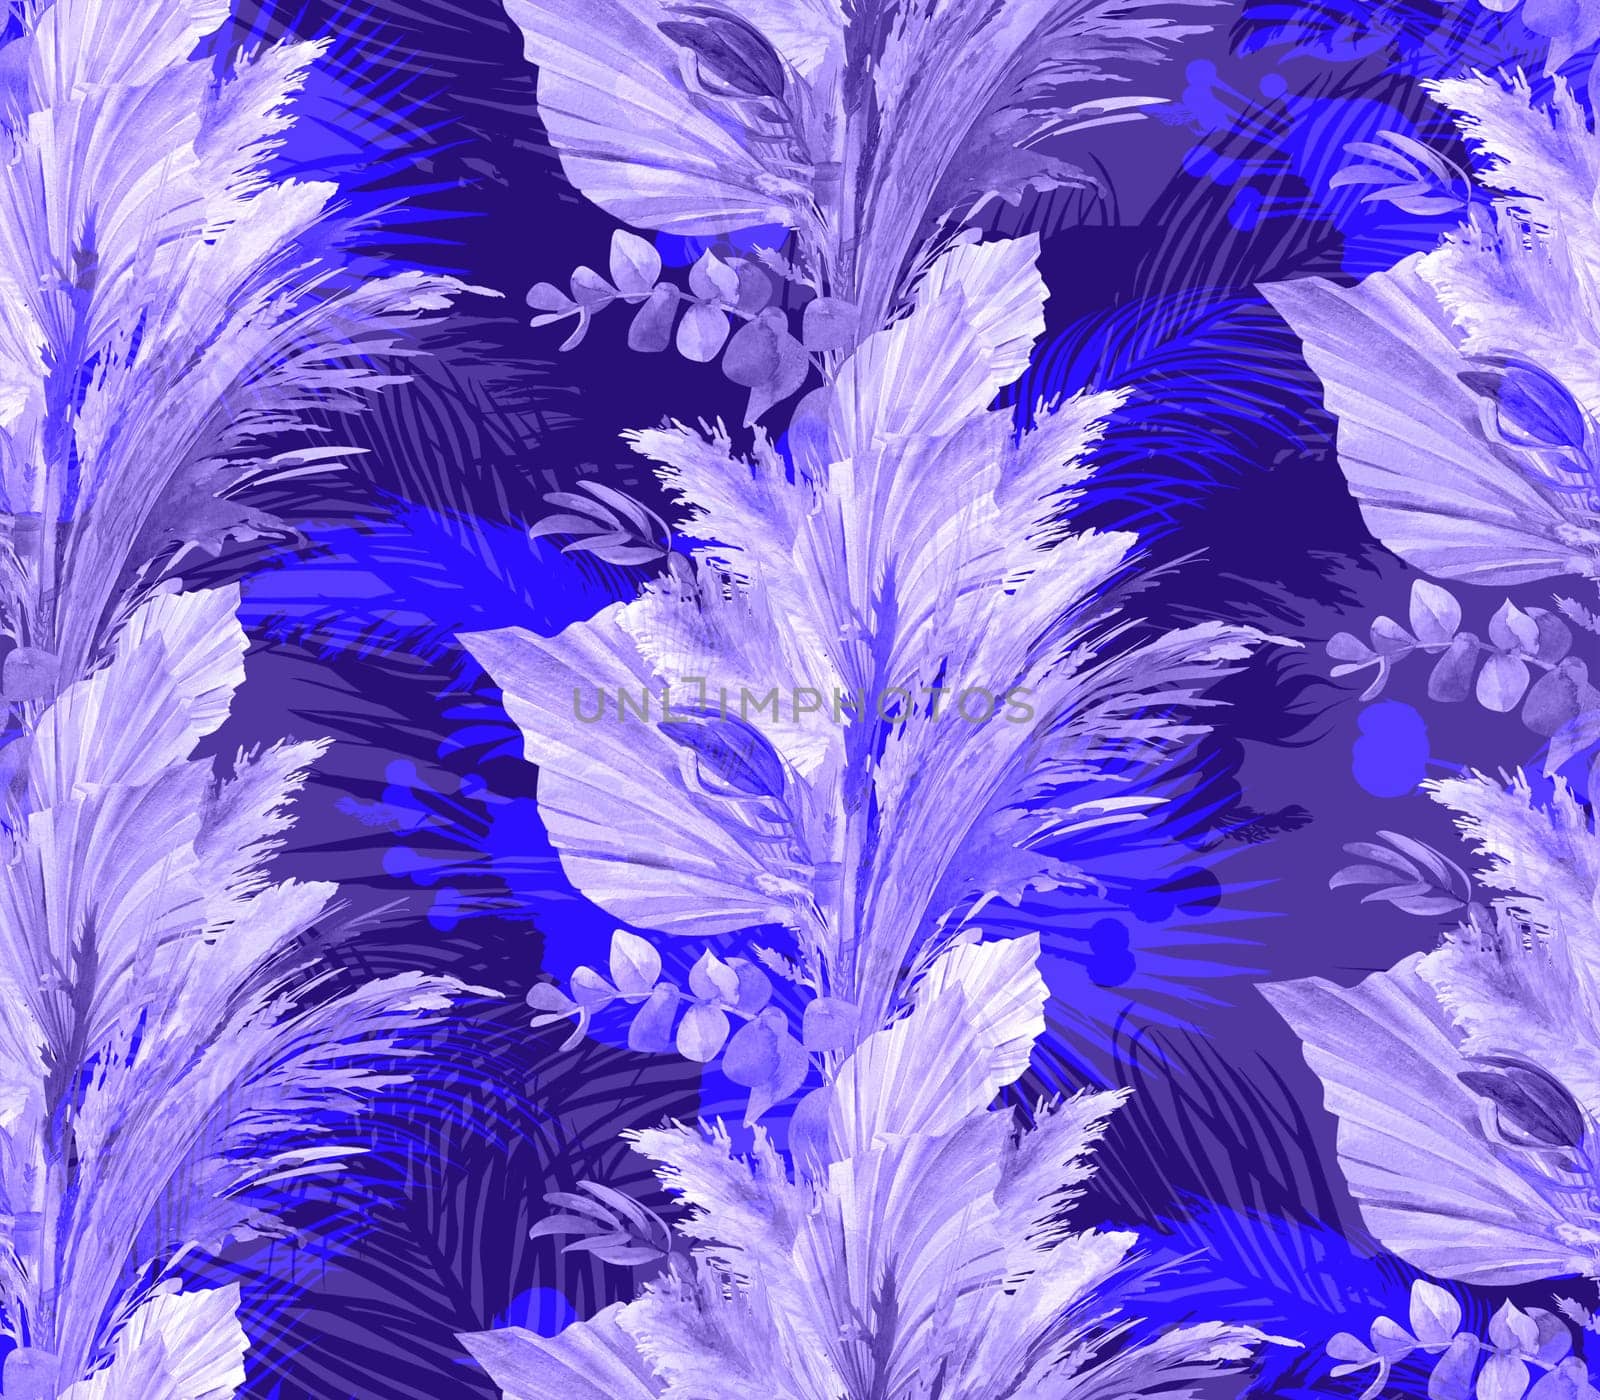 Seamless monochrome summer pattern with blue and purple silhouettes of dry palm leaves of various shapes on a blue background. Mix of botanical tropical silhouettes for textile and surface design